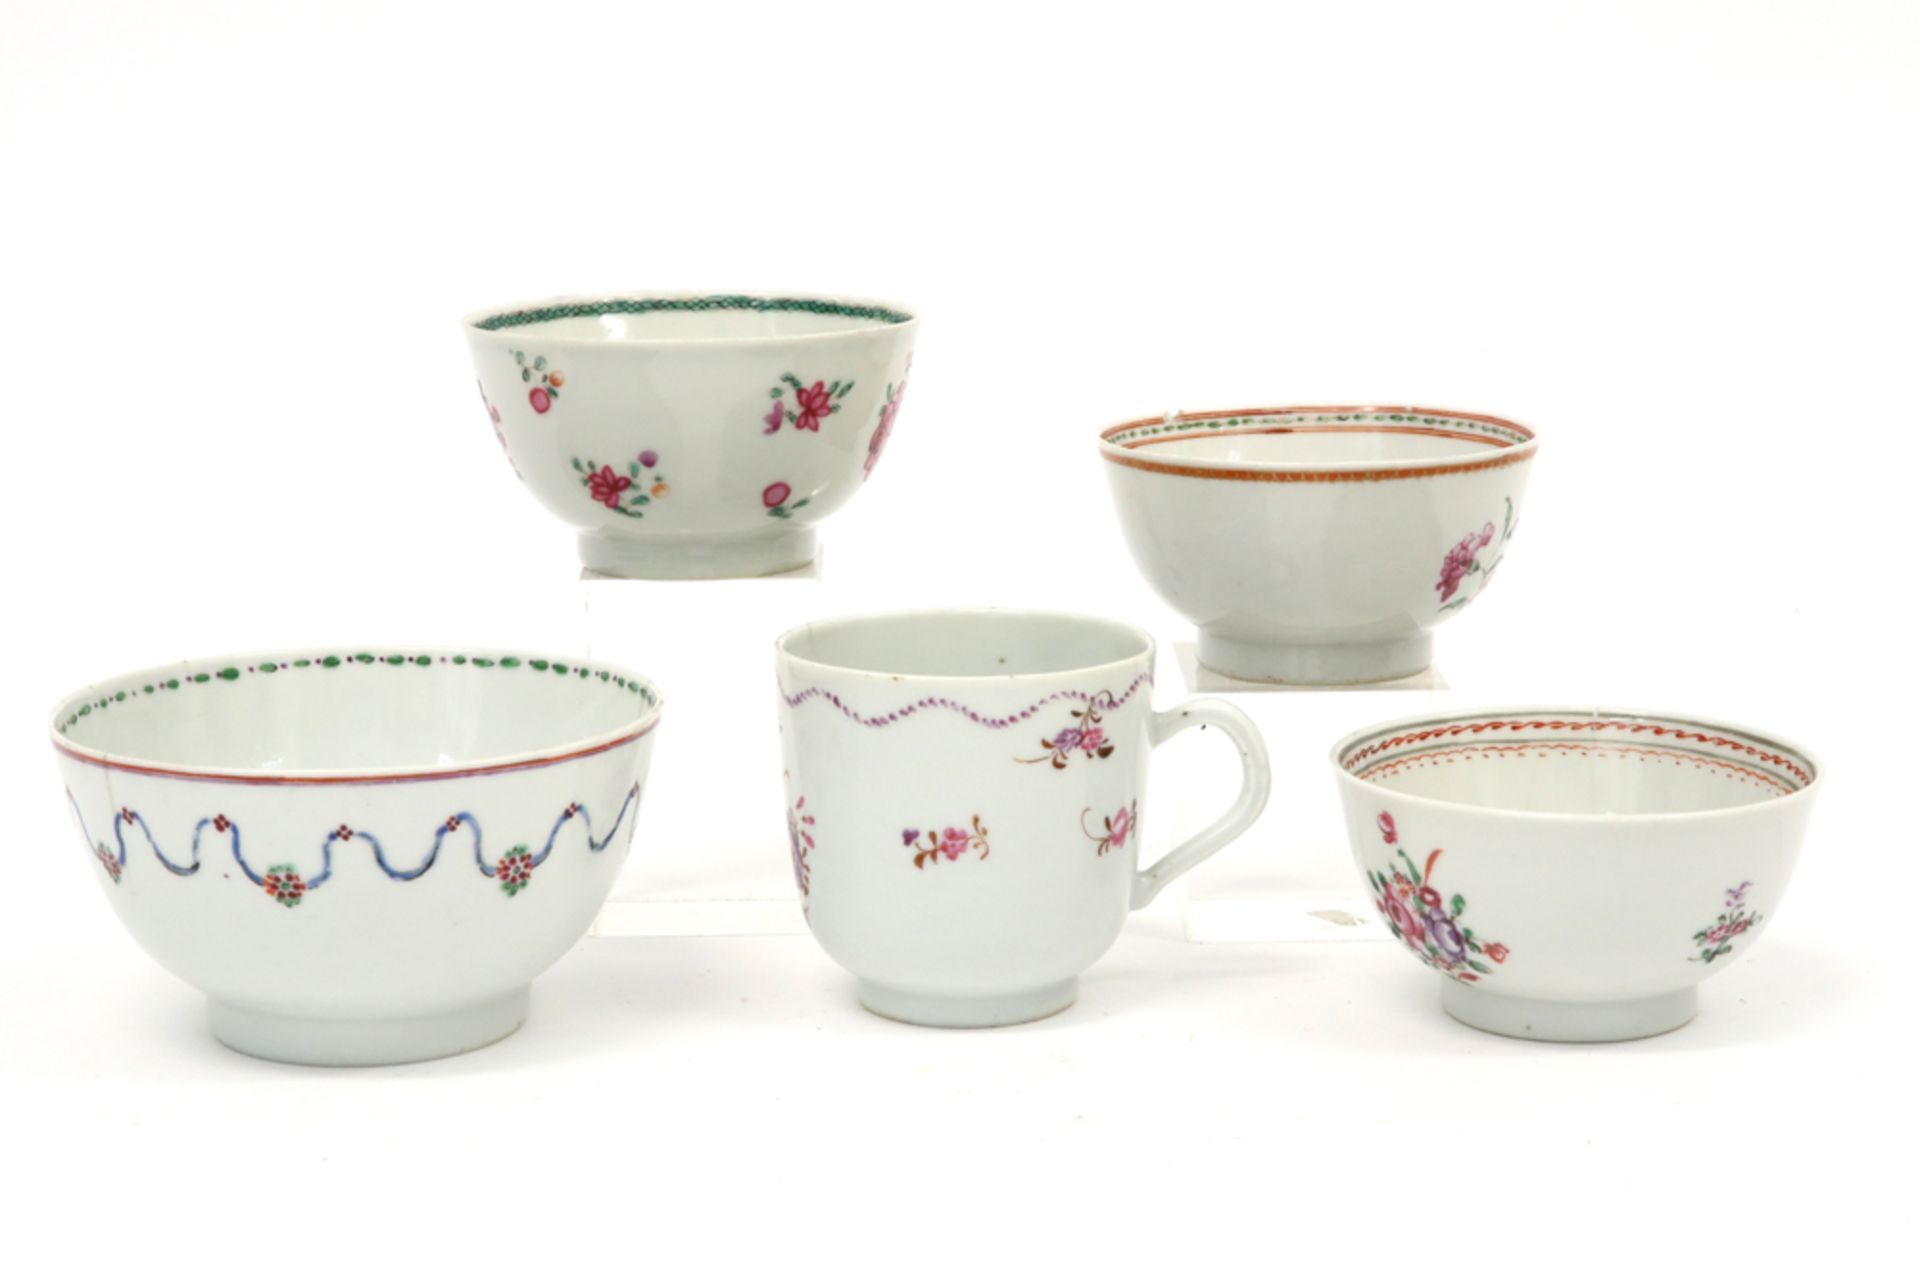 five 18th Cent. Chinese cups in porcelain with polychrome decor || Lot van vijf achttiende eeuwse